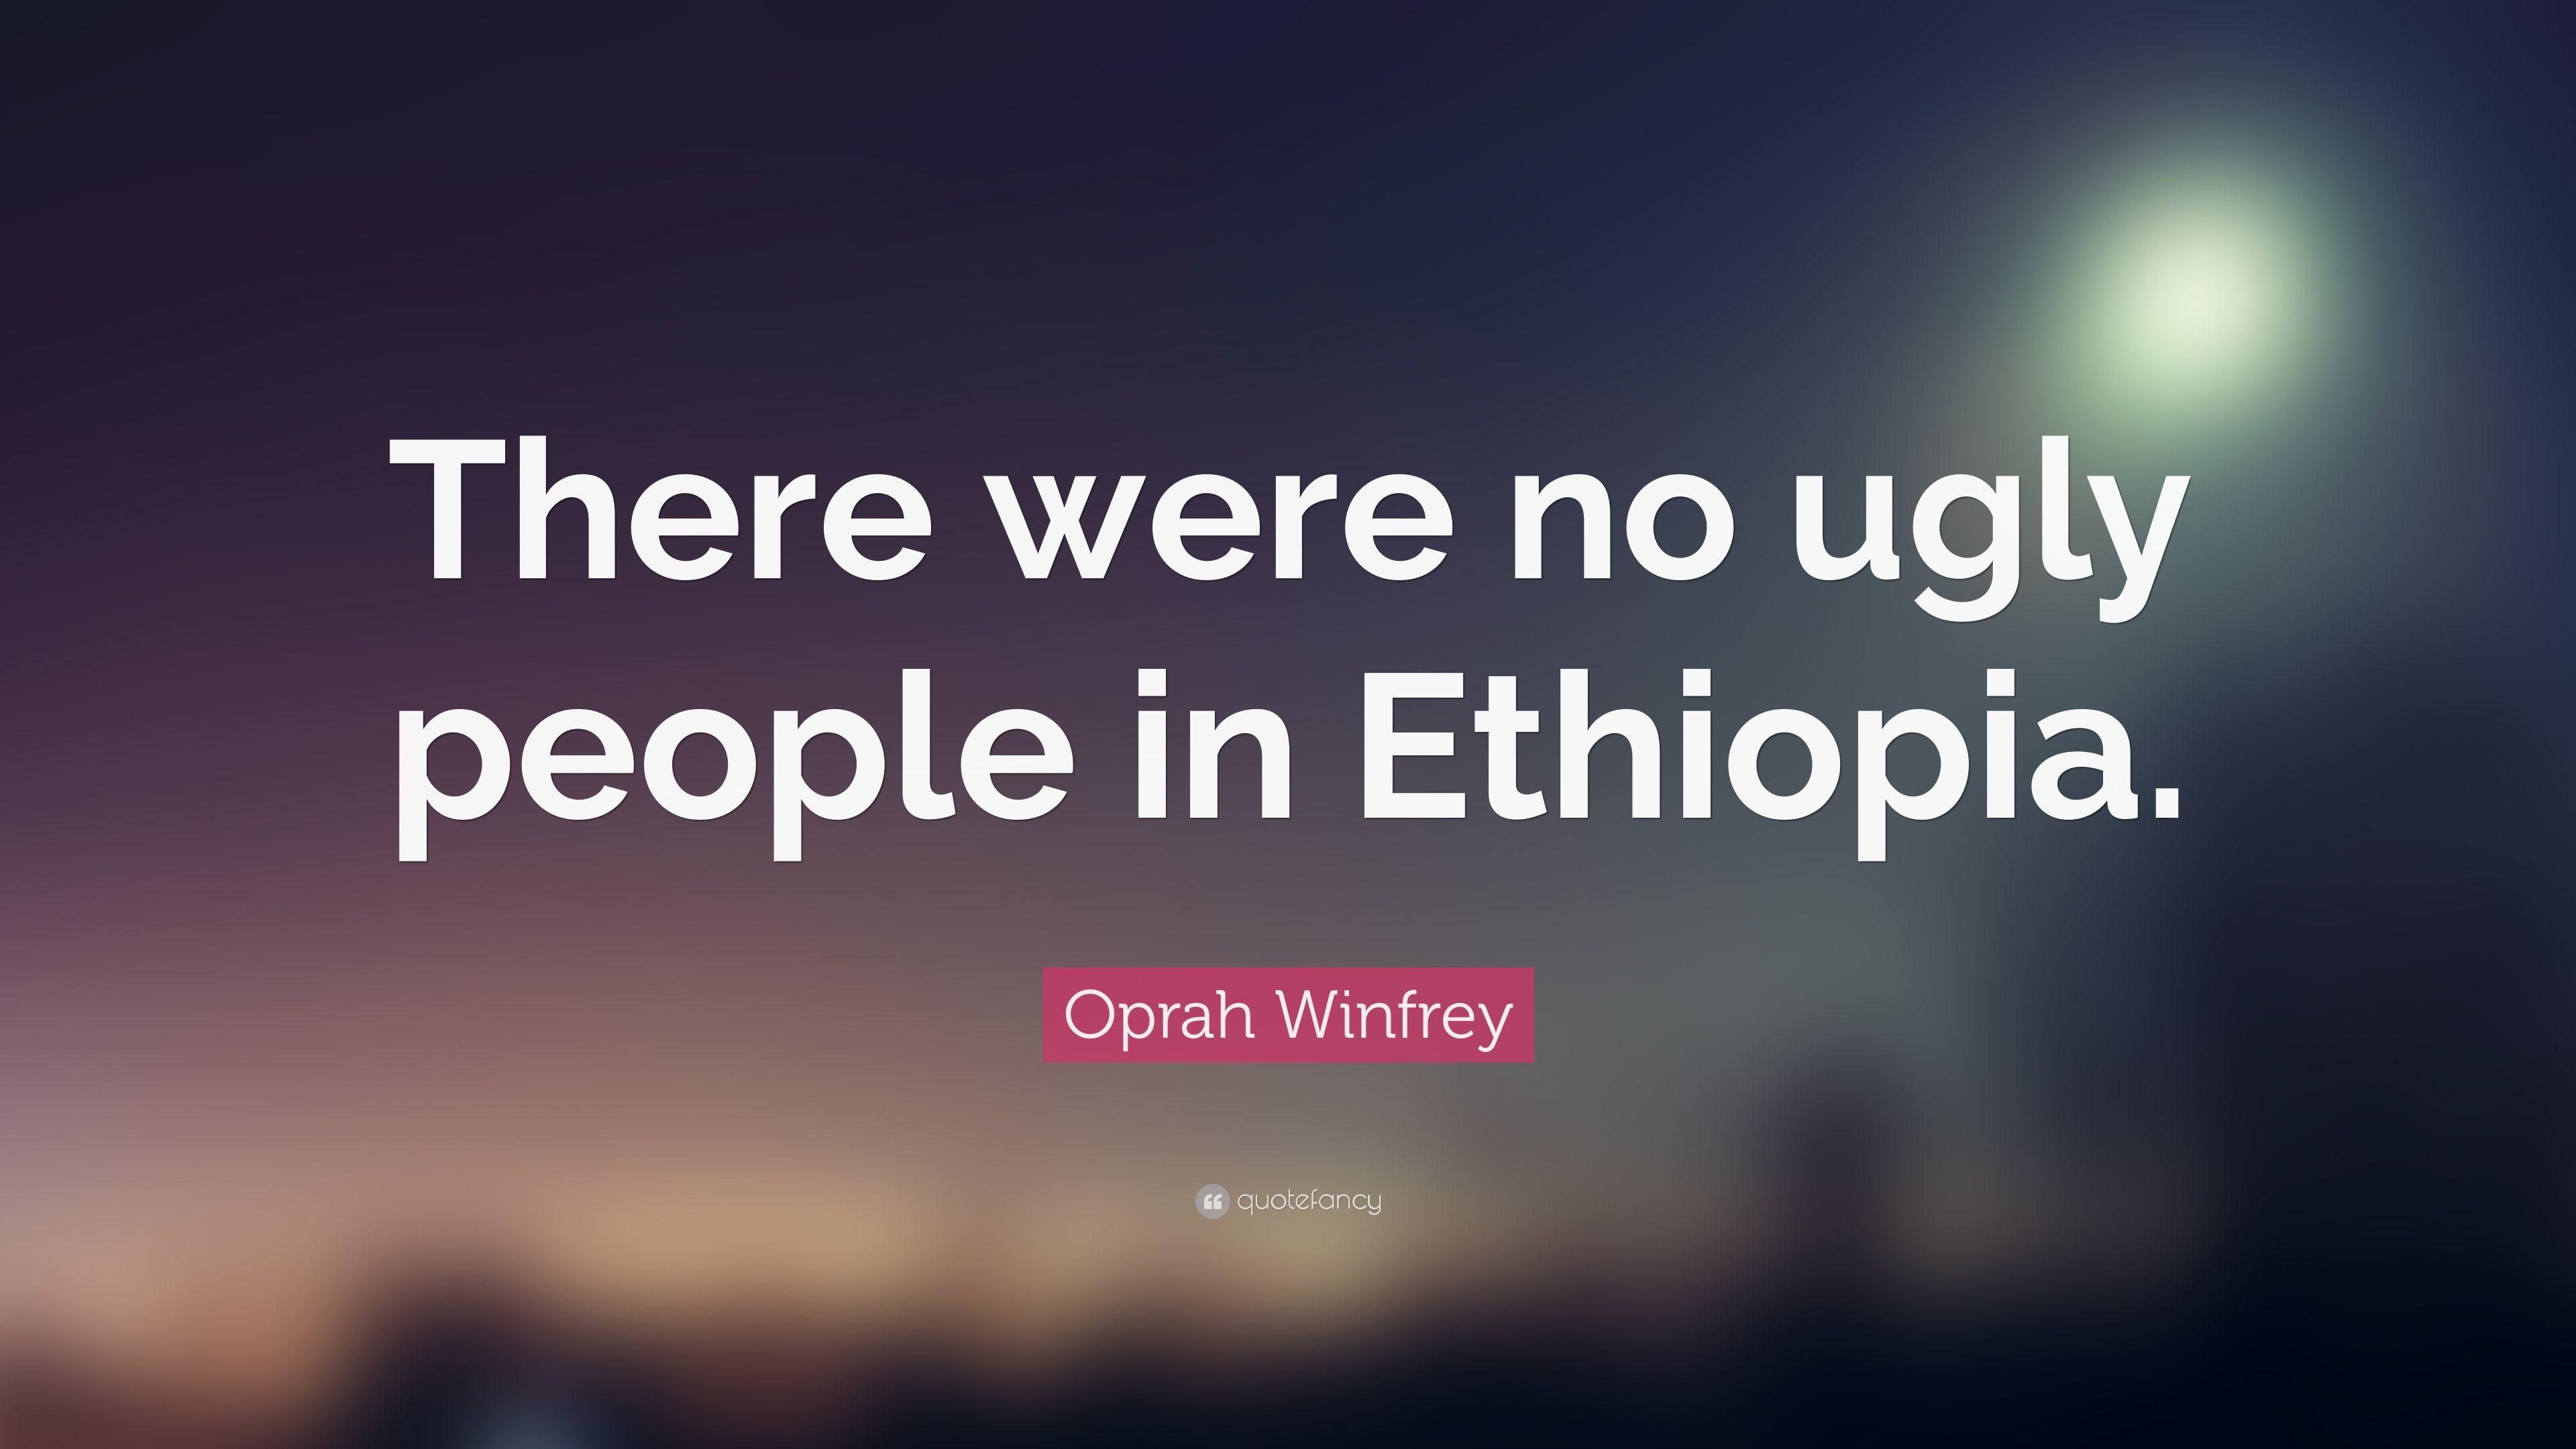 Oprah Winfrey Quote: “There were no ugly people in Ethiopia.” 10